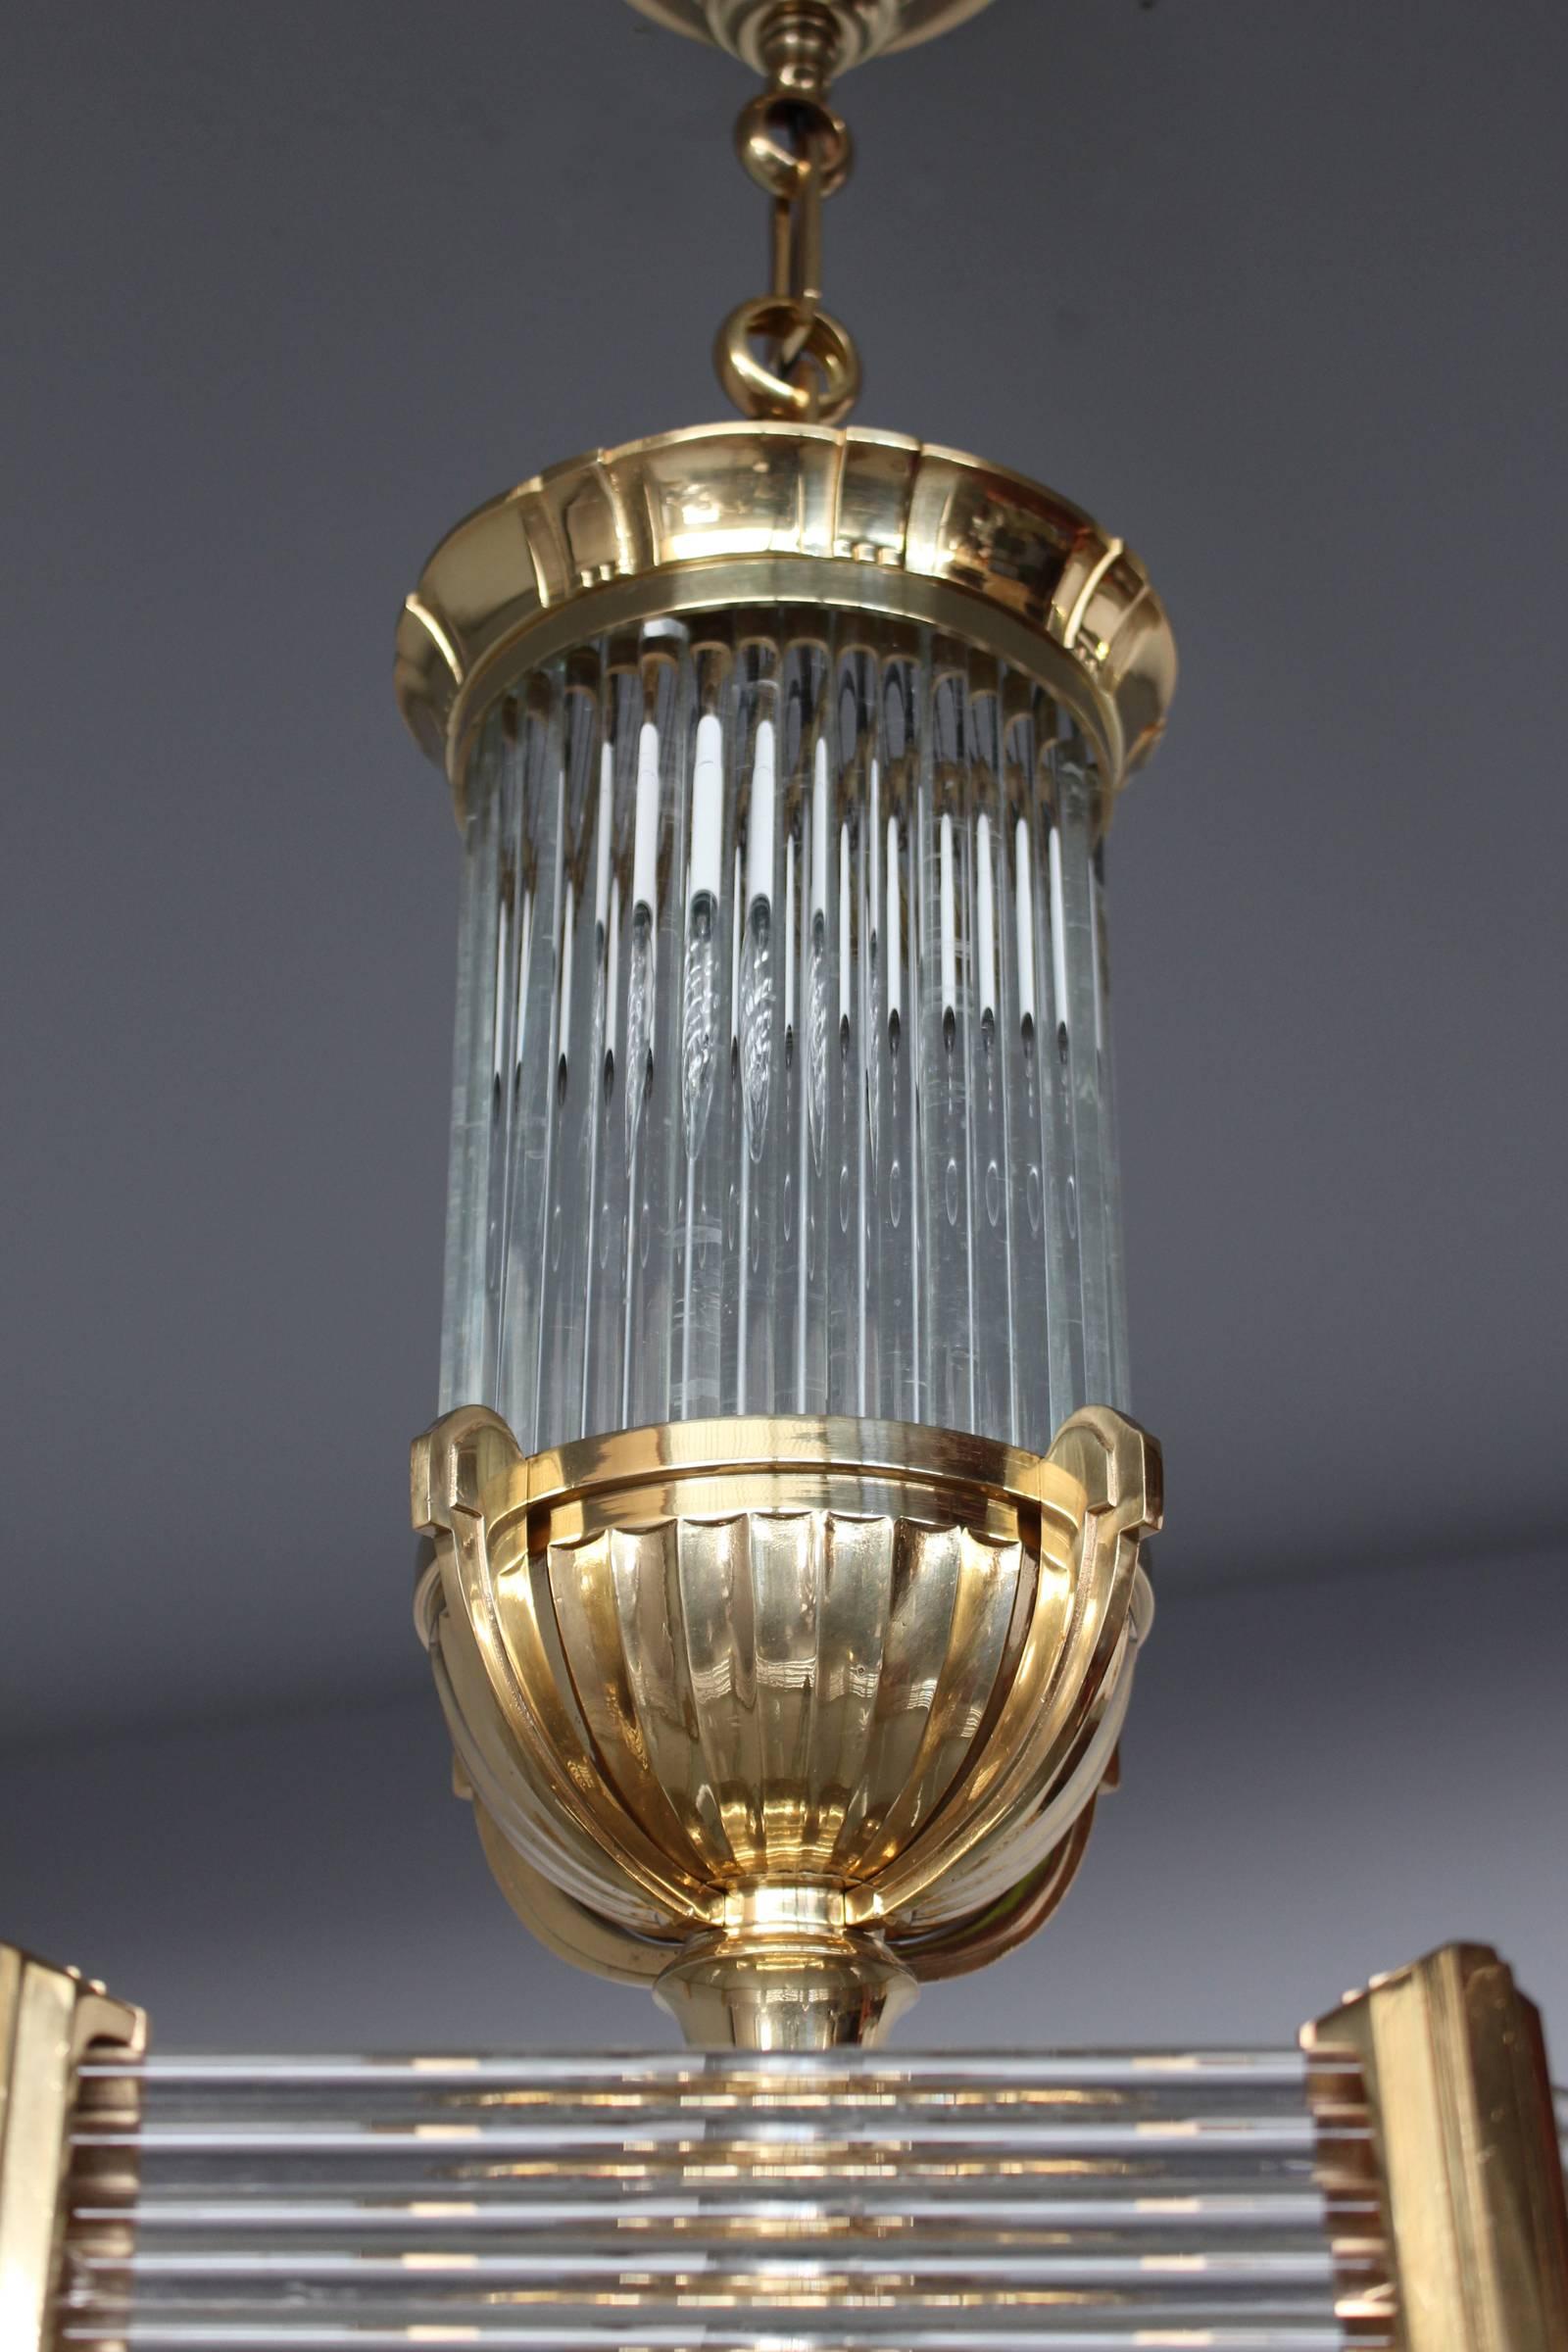 A Fine French Art Deco Octagonal Bronze and Glass Chandelier by Petitot For Sale 2